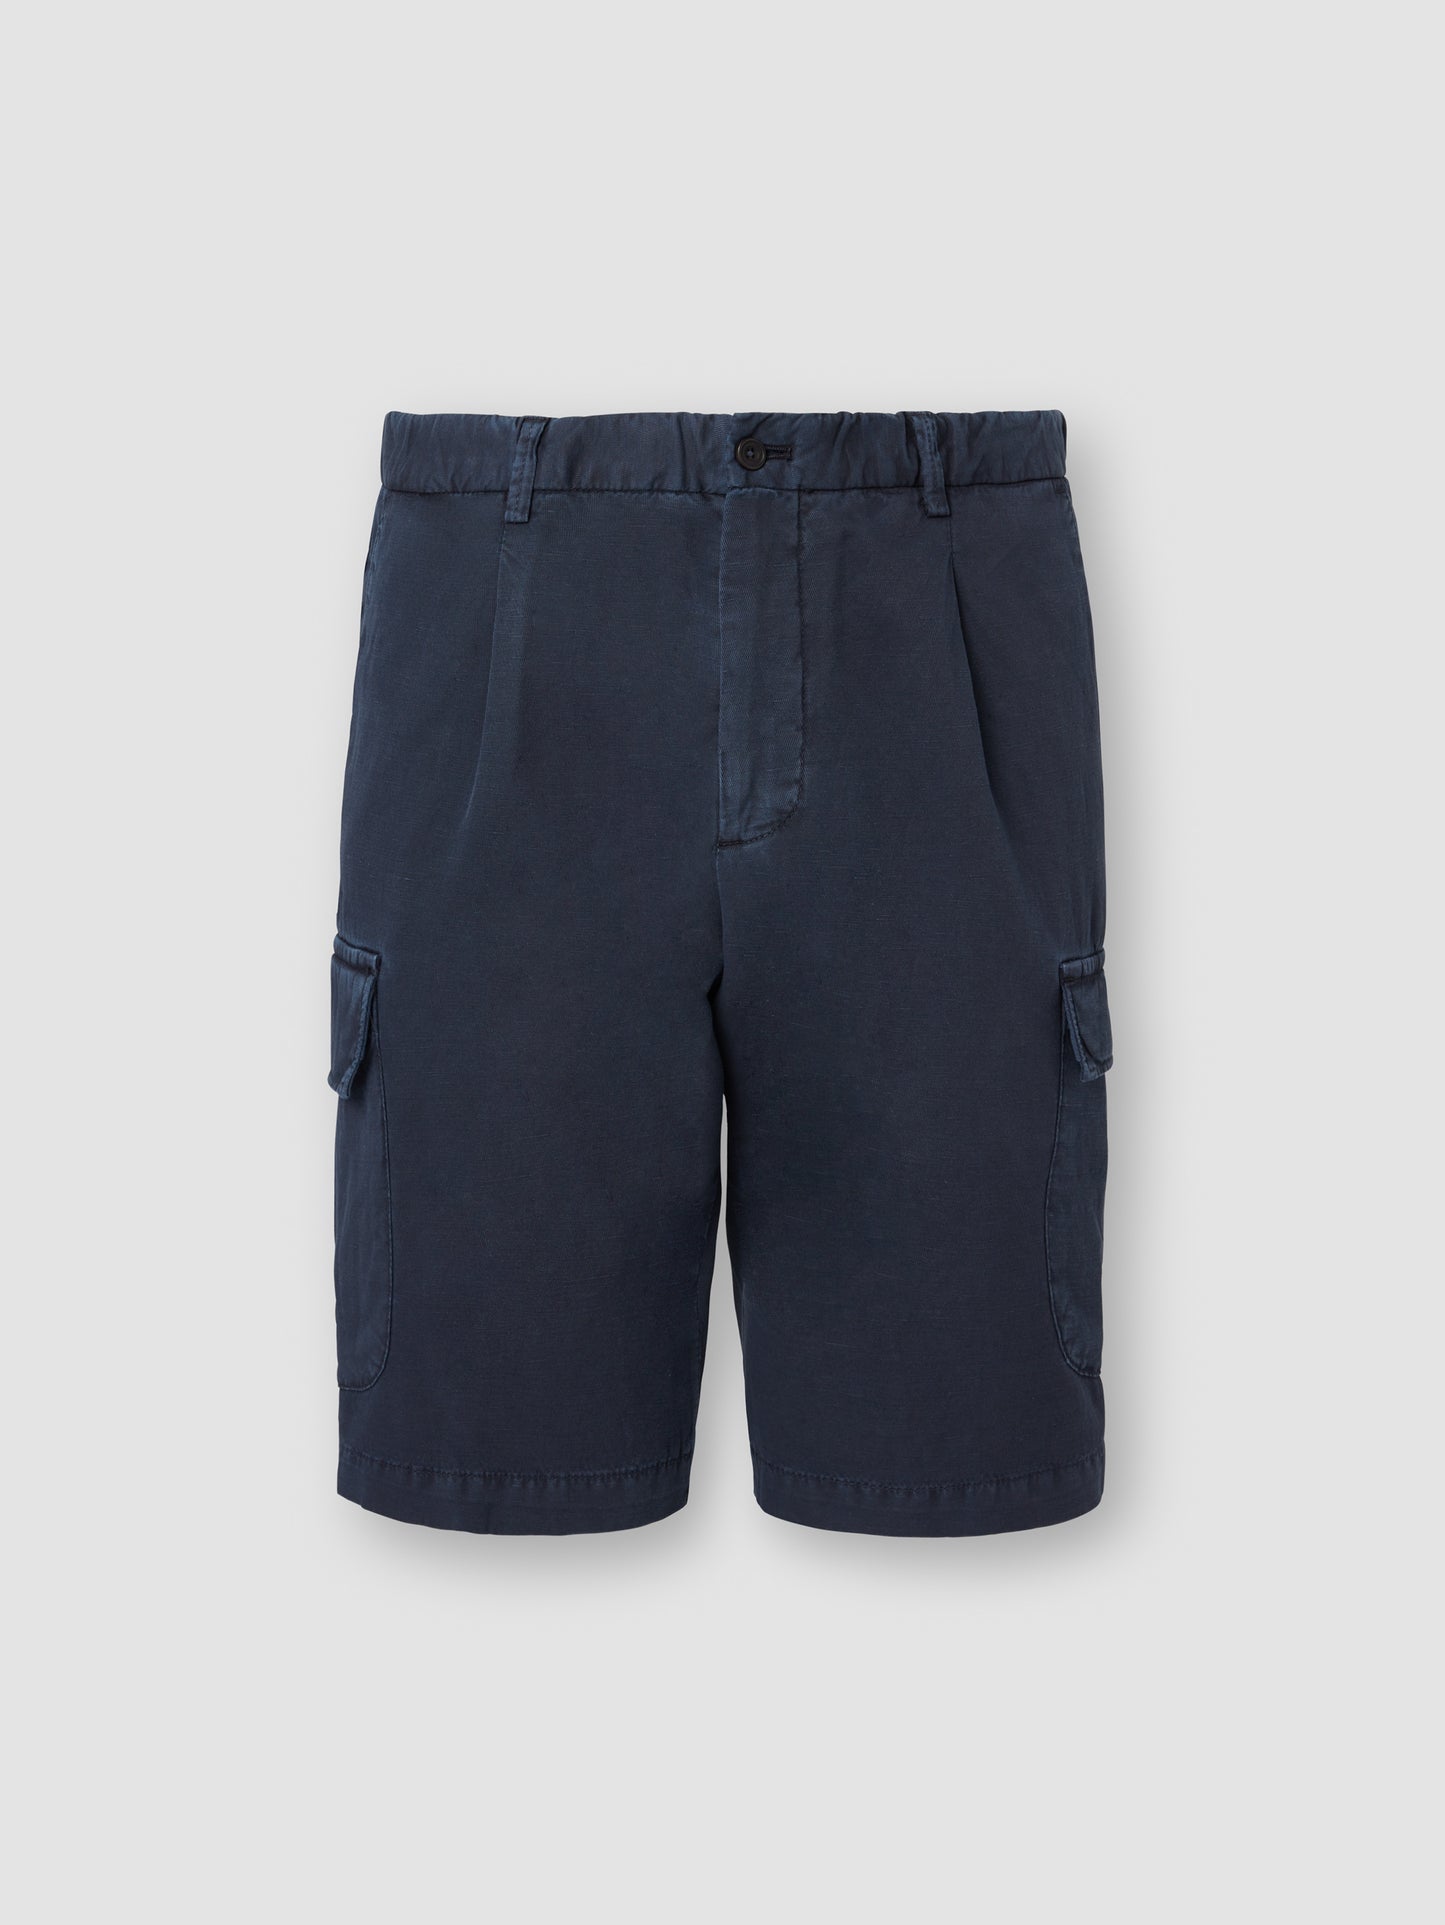 Cotton Drill Pleated Cargo Shorts Navy Product Image